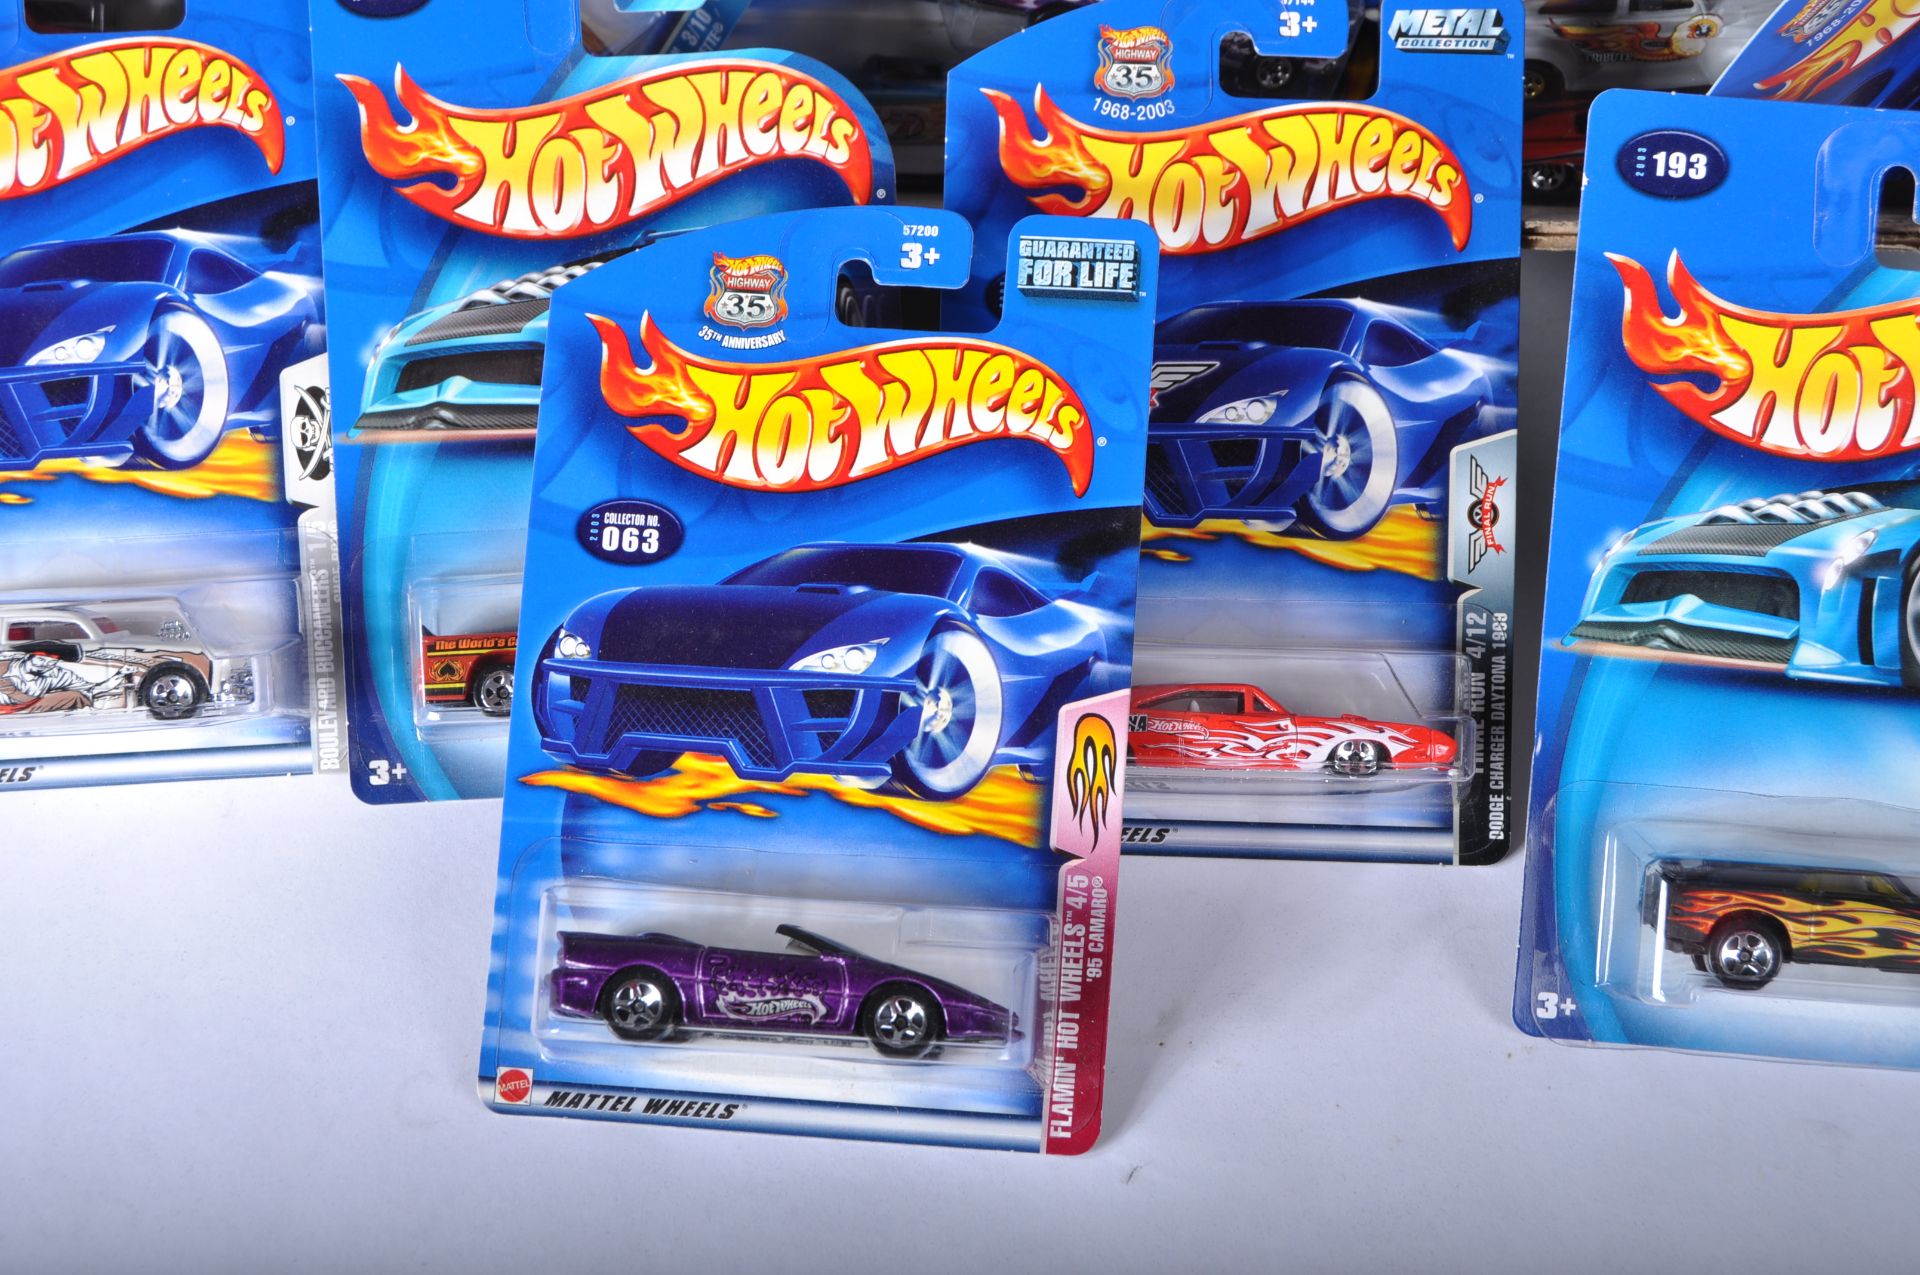 COLLECTION OF ASSORTED CARDED MATTEL HOT WHEELS DIECAST MODELS - Image 3 of 7